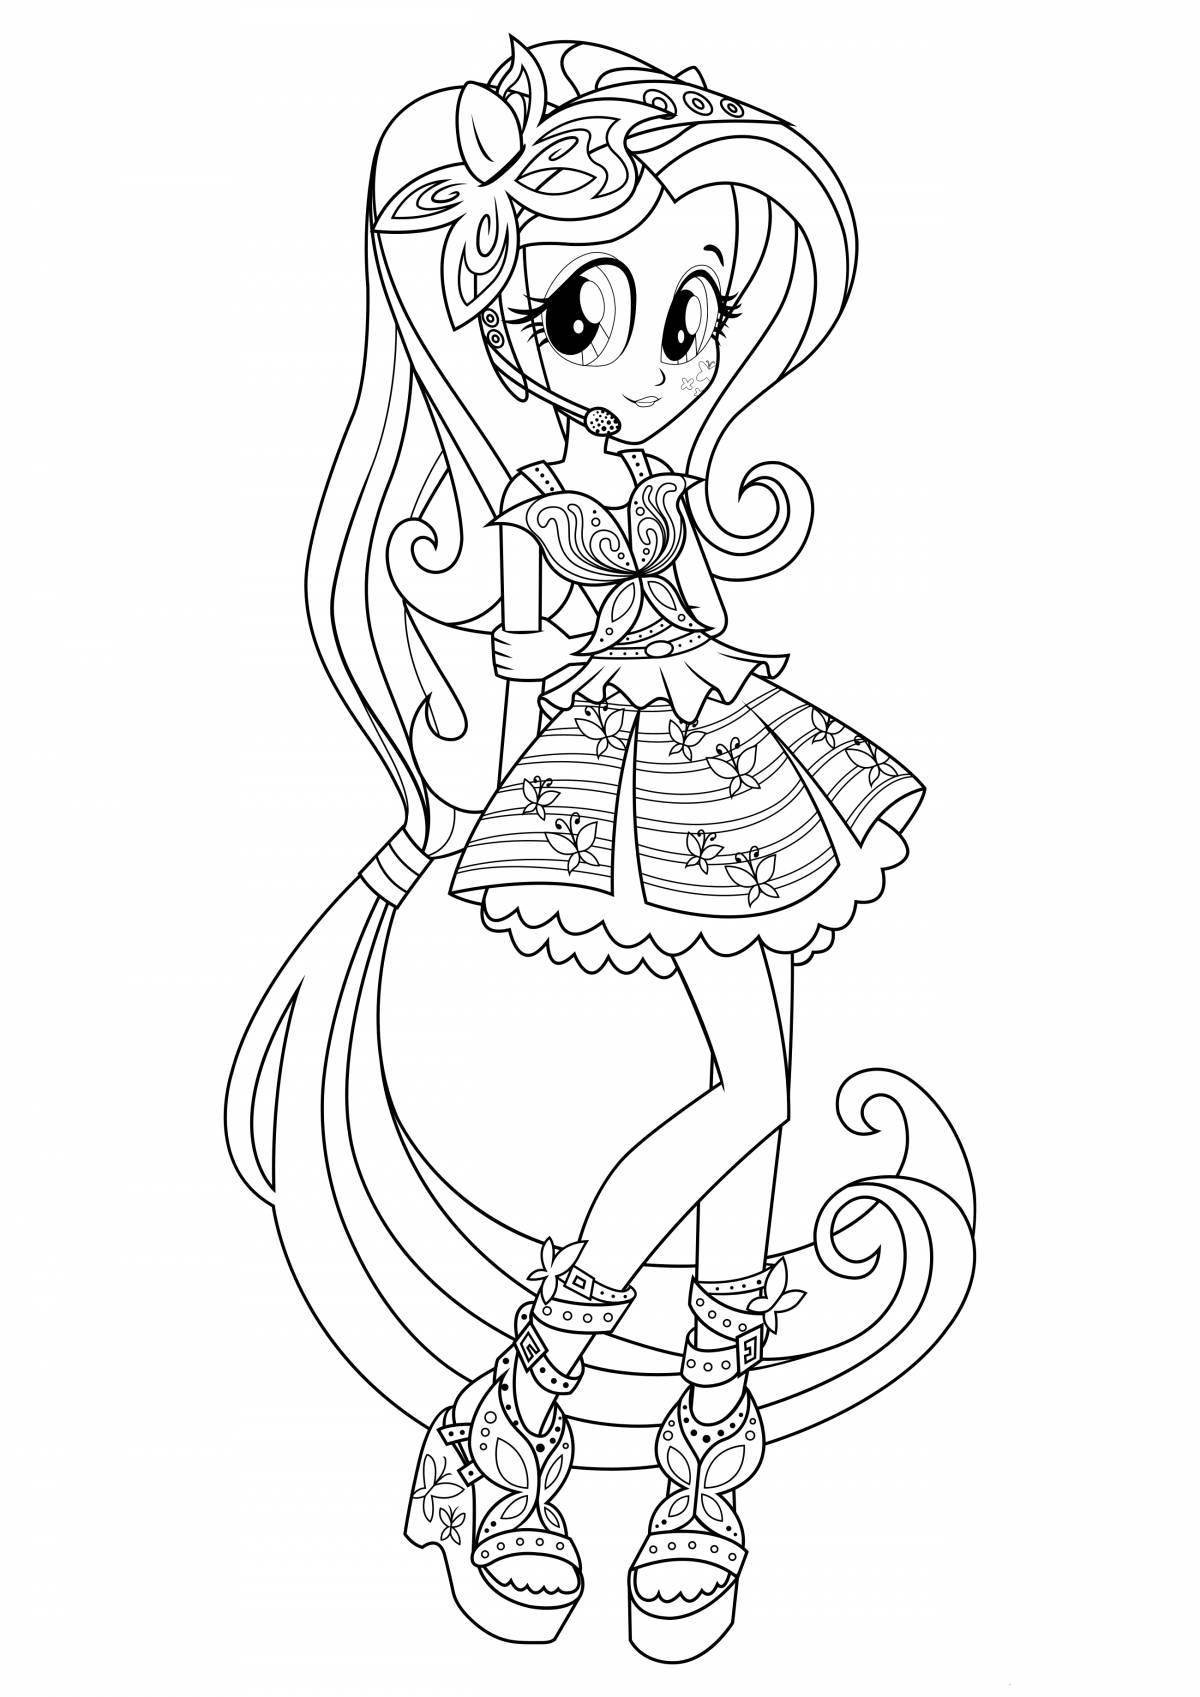 Radiant equestria pony coloring page